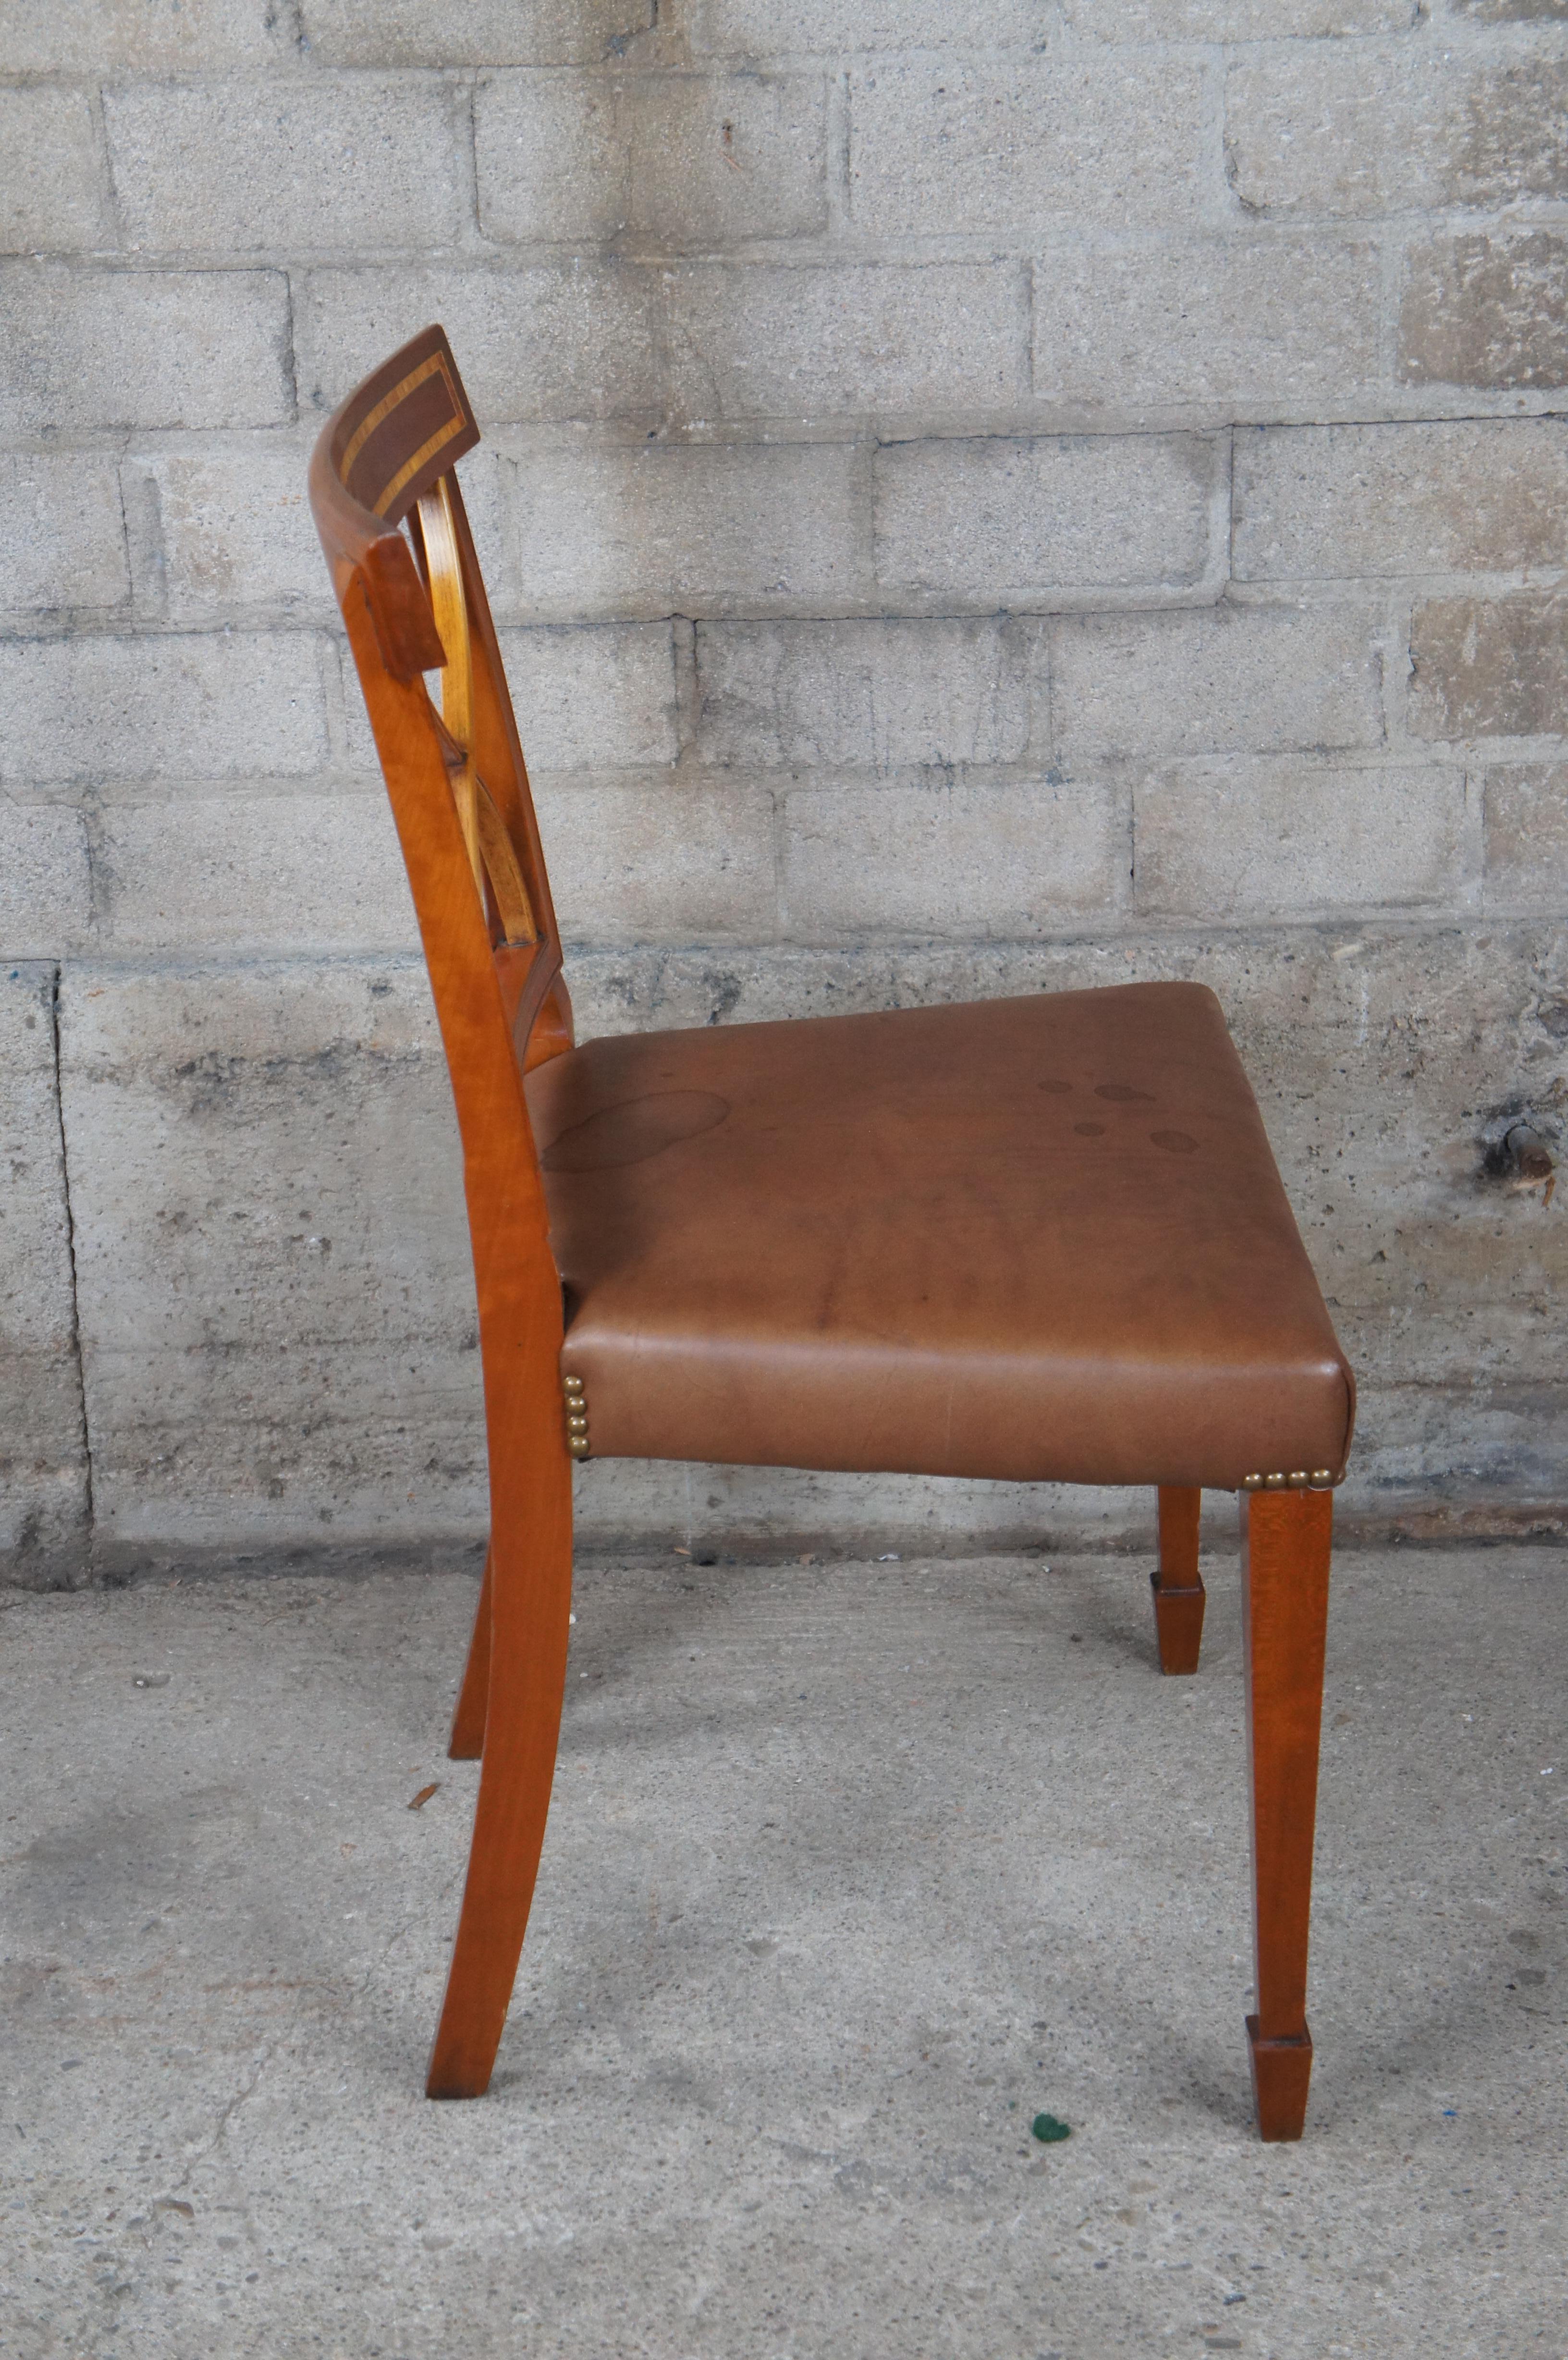 20th Century Arthur Brett English Sheraton Style Mahogany Inlaid Leather Dining Side Chair For Sale